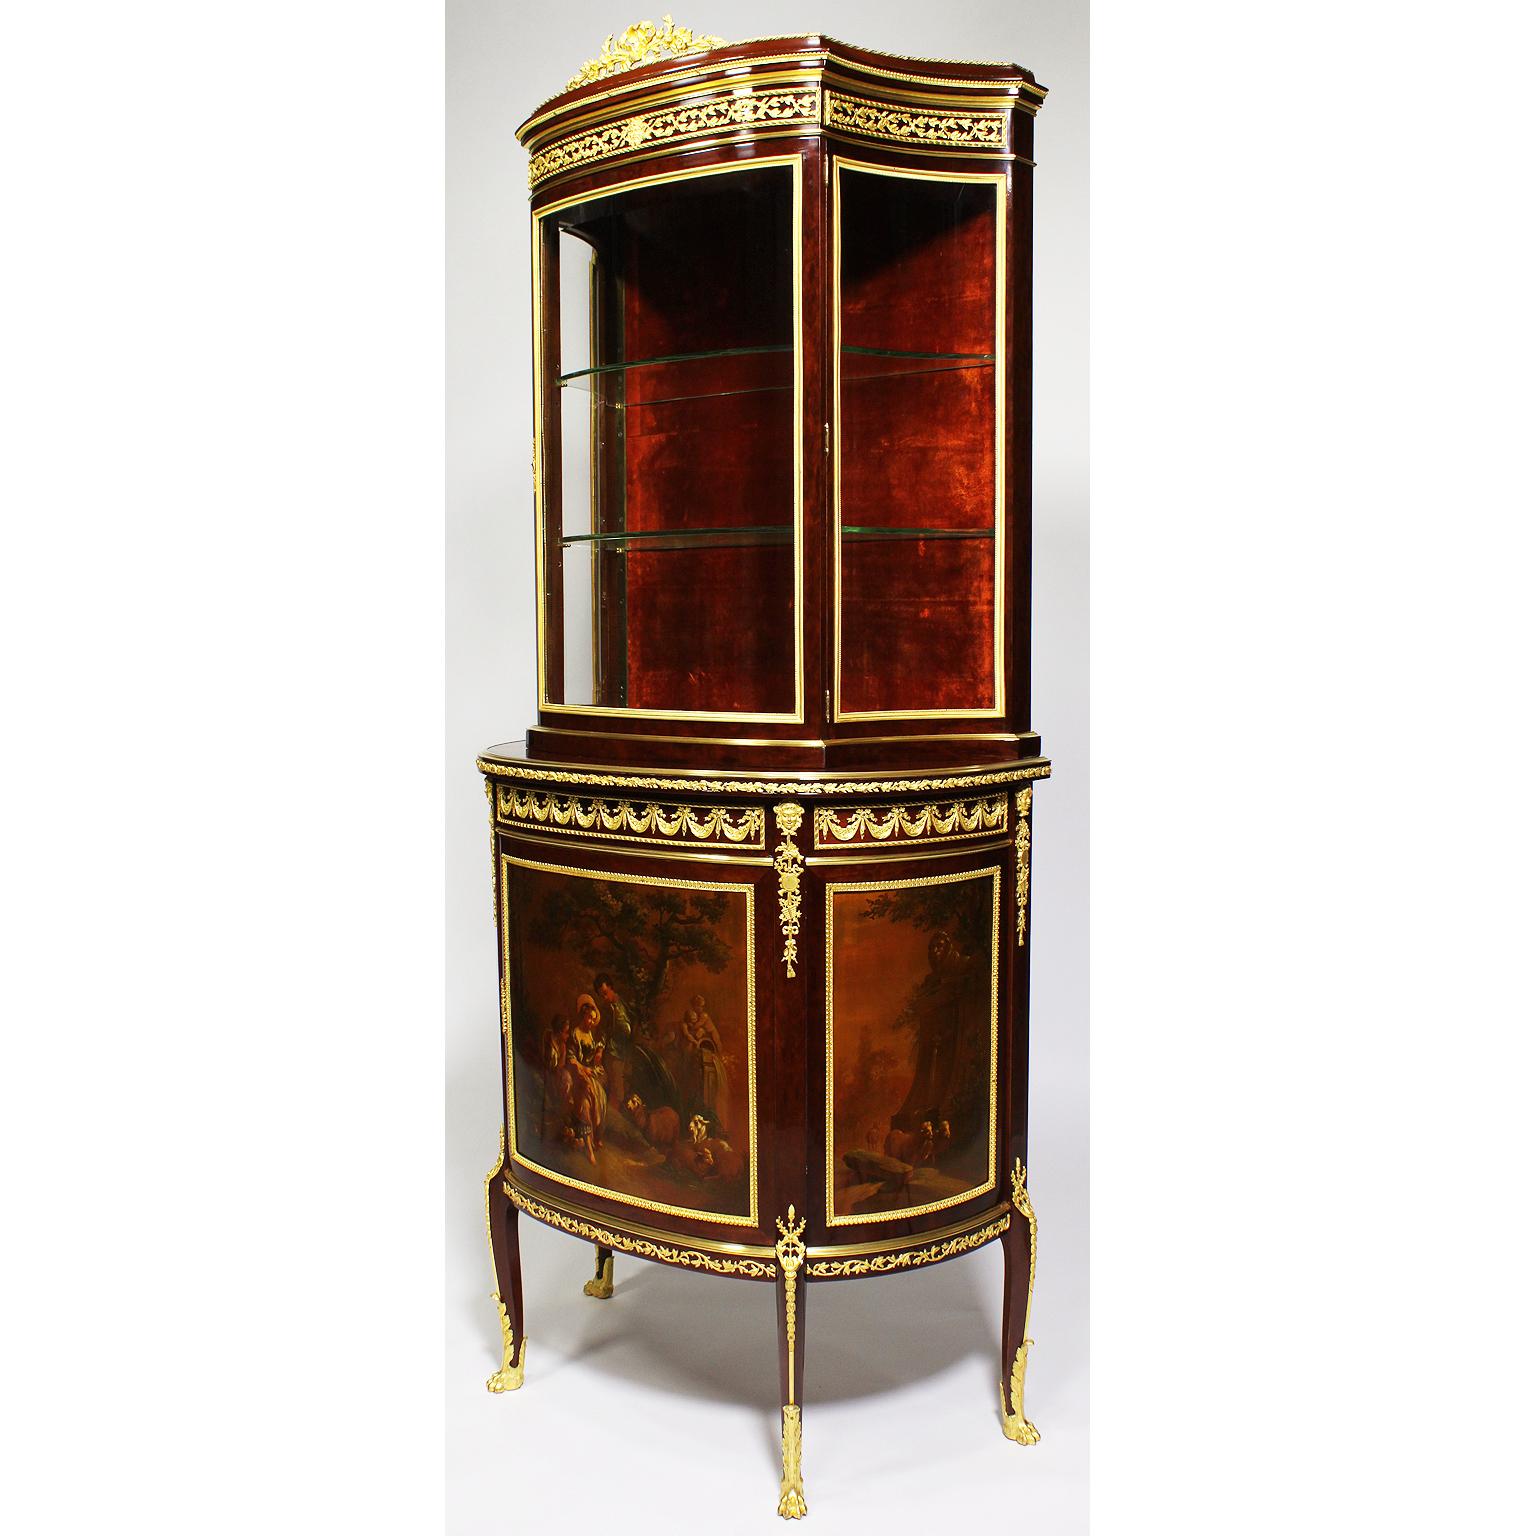 A very fine French 19th century Louis XV style ormolu mounted plum pudding mahogany veneer, mahogany and Vernis Martin decorated vitrine à Deux Corps, probably by François Linke (1855-1946). The lower structure fitted with finely chased gilt-bronze